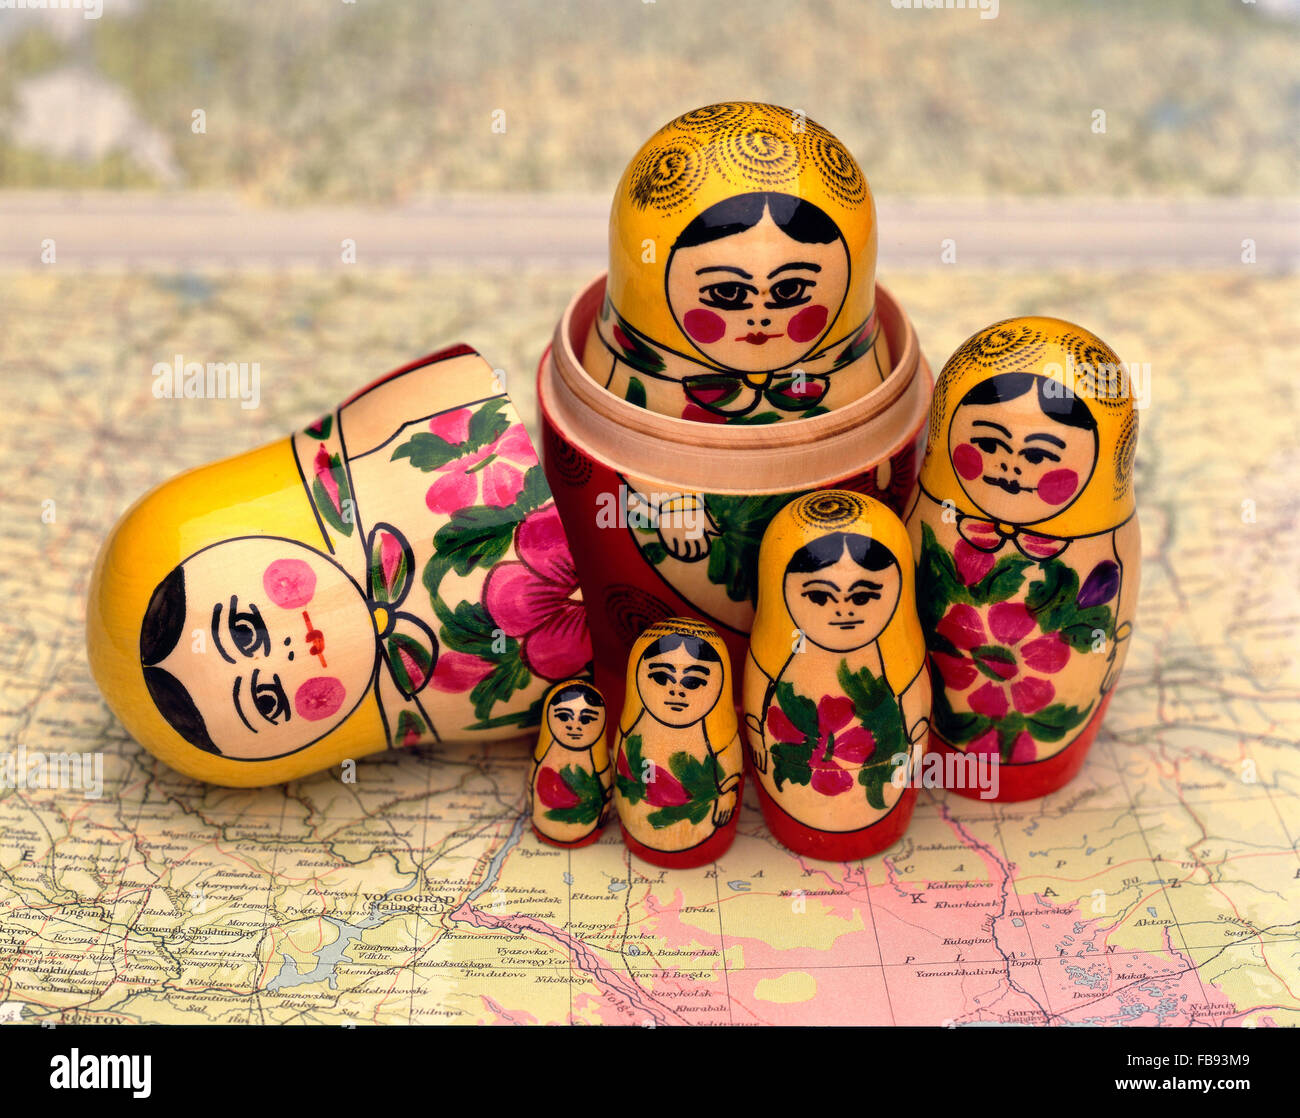 Russian Nesting Doll High Resolution Stock Photography and Images - Alamy